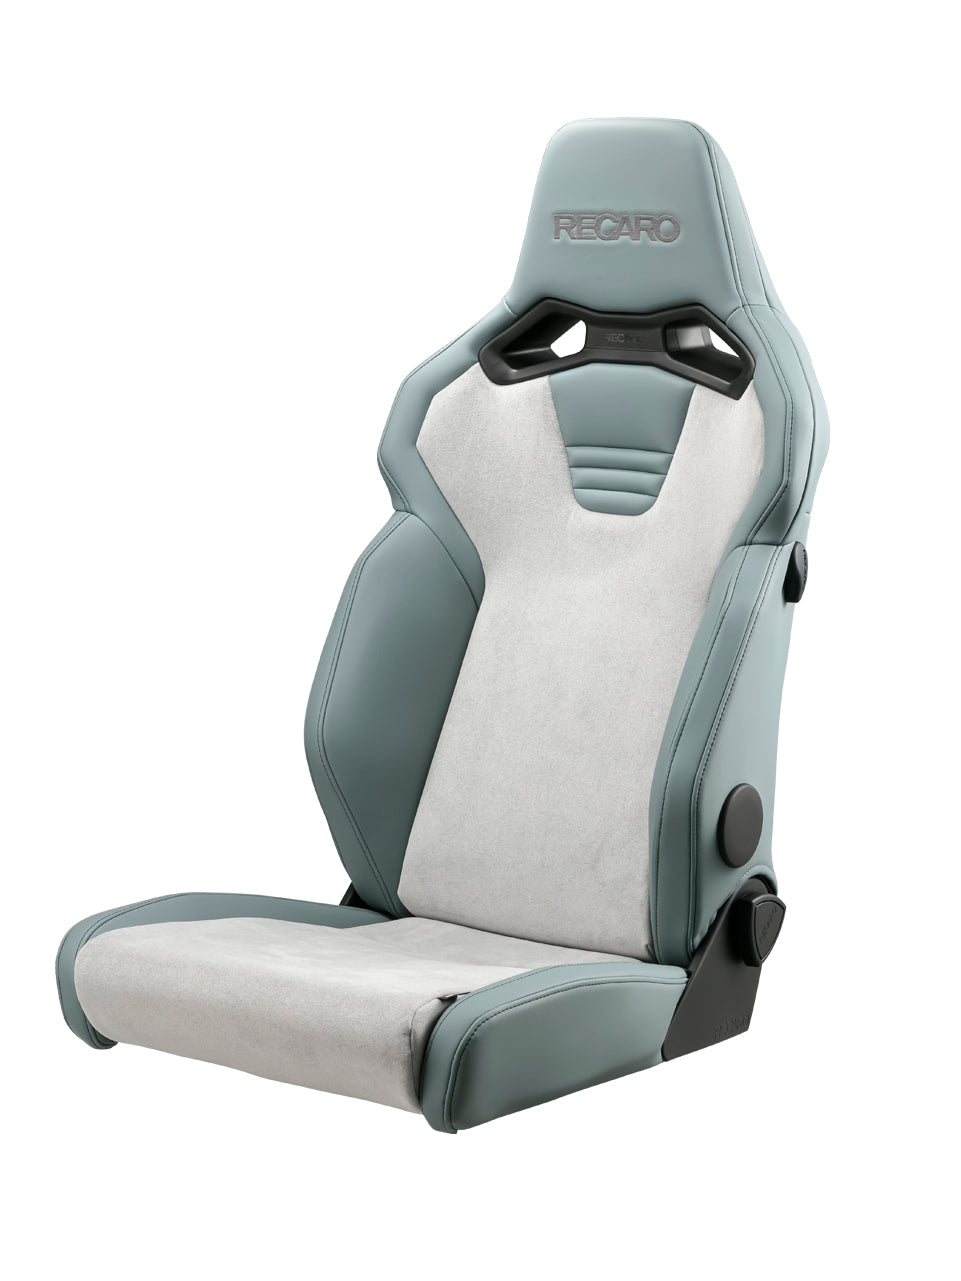 RECARO SR-C UT100H MG SG ARTIFICIAL LEATHER SURGE GRAY COLOR AND ULTRA SUEDE MELANGE GRAY COLOR WITH HEATED SEATS FOR  81-121.21.648-0